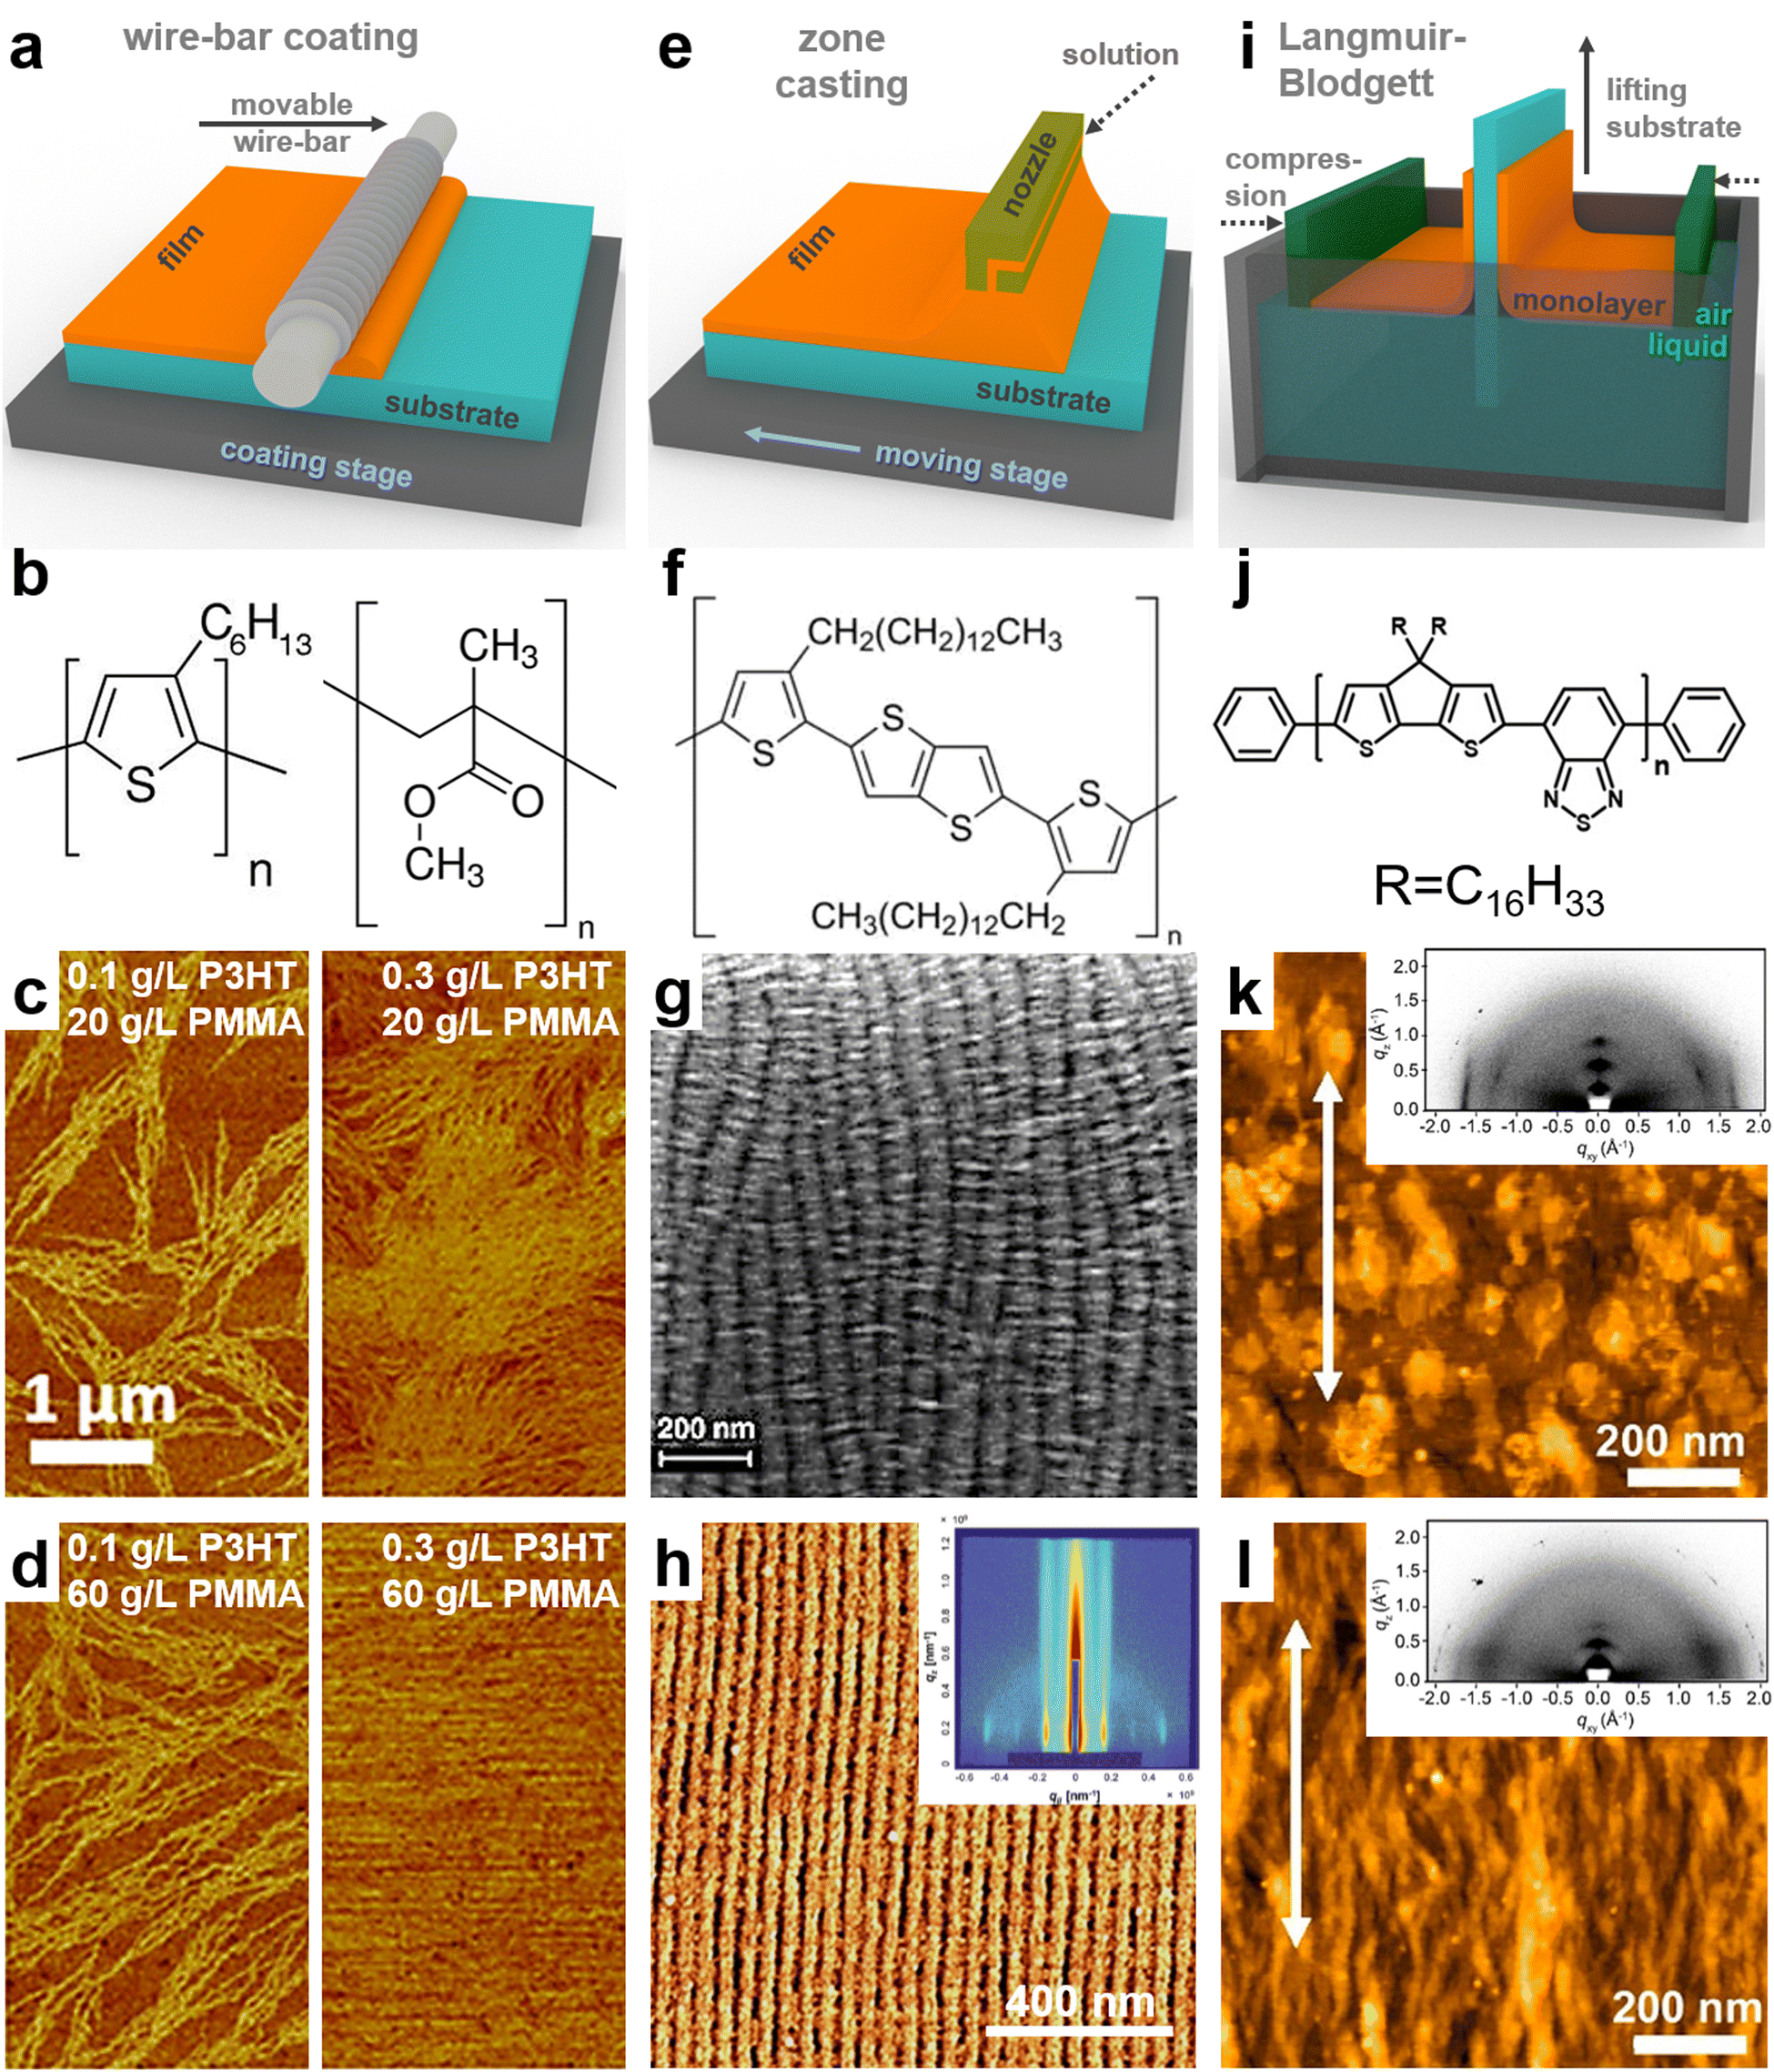 Prominent processing techniques to manipulate semiconducting polymer  microstructures - Journal of Materials Chemistry C (RSC Publishing)  DOI:10.1039/D2TC03971K